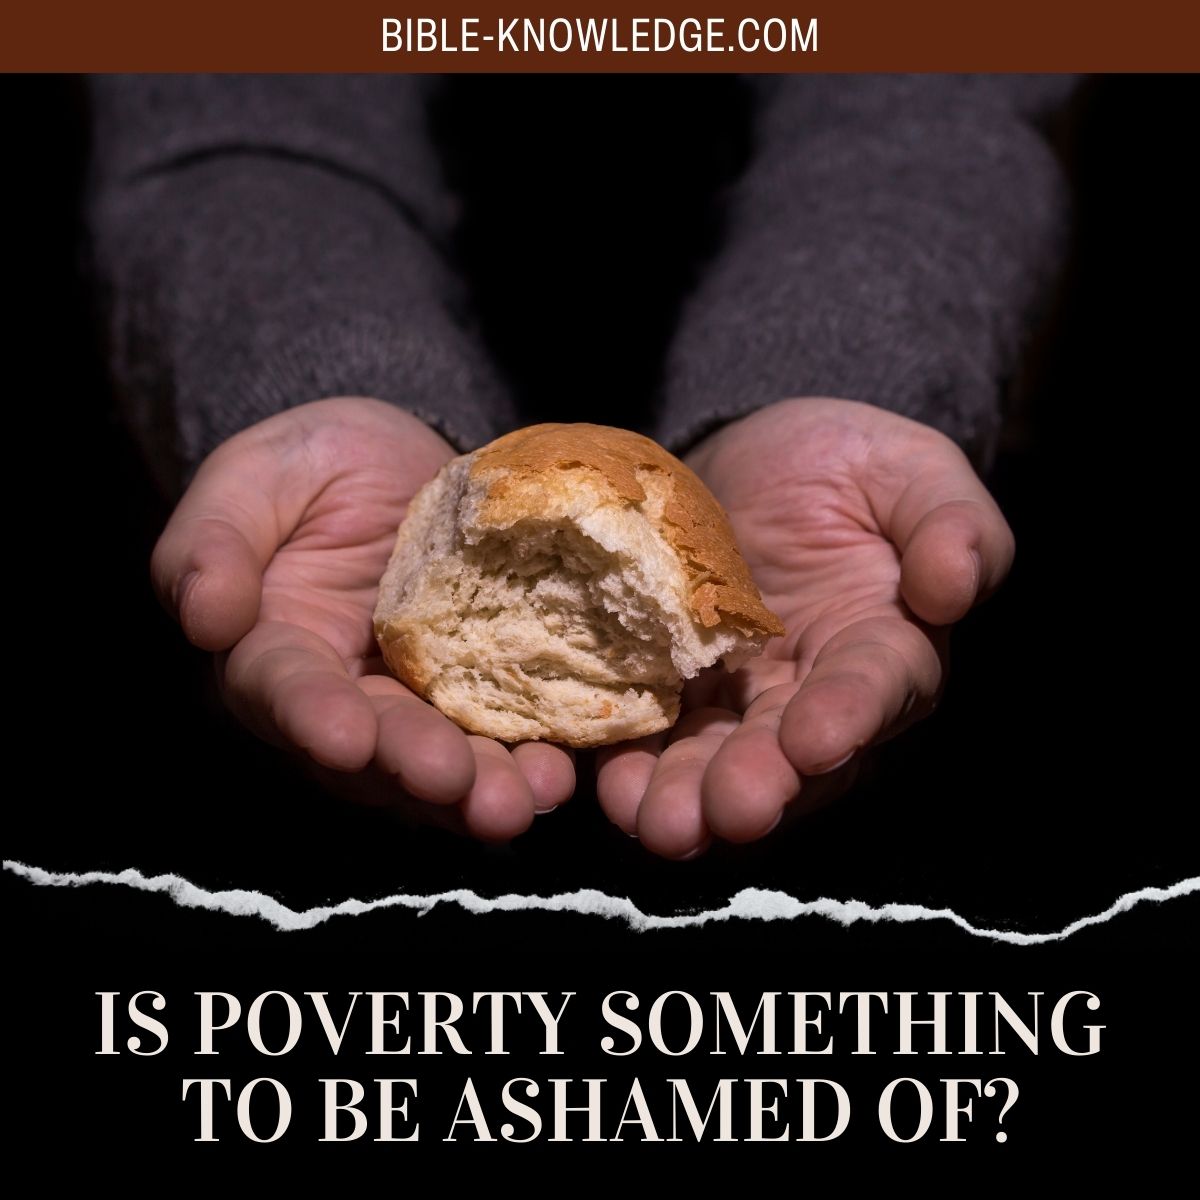 Is Poverty Something to Be Ashamed Of?